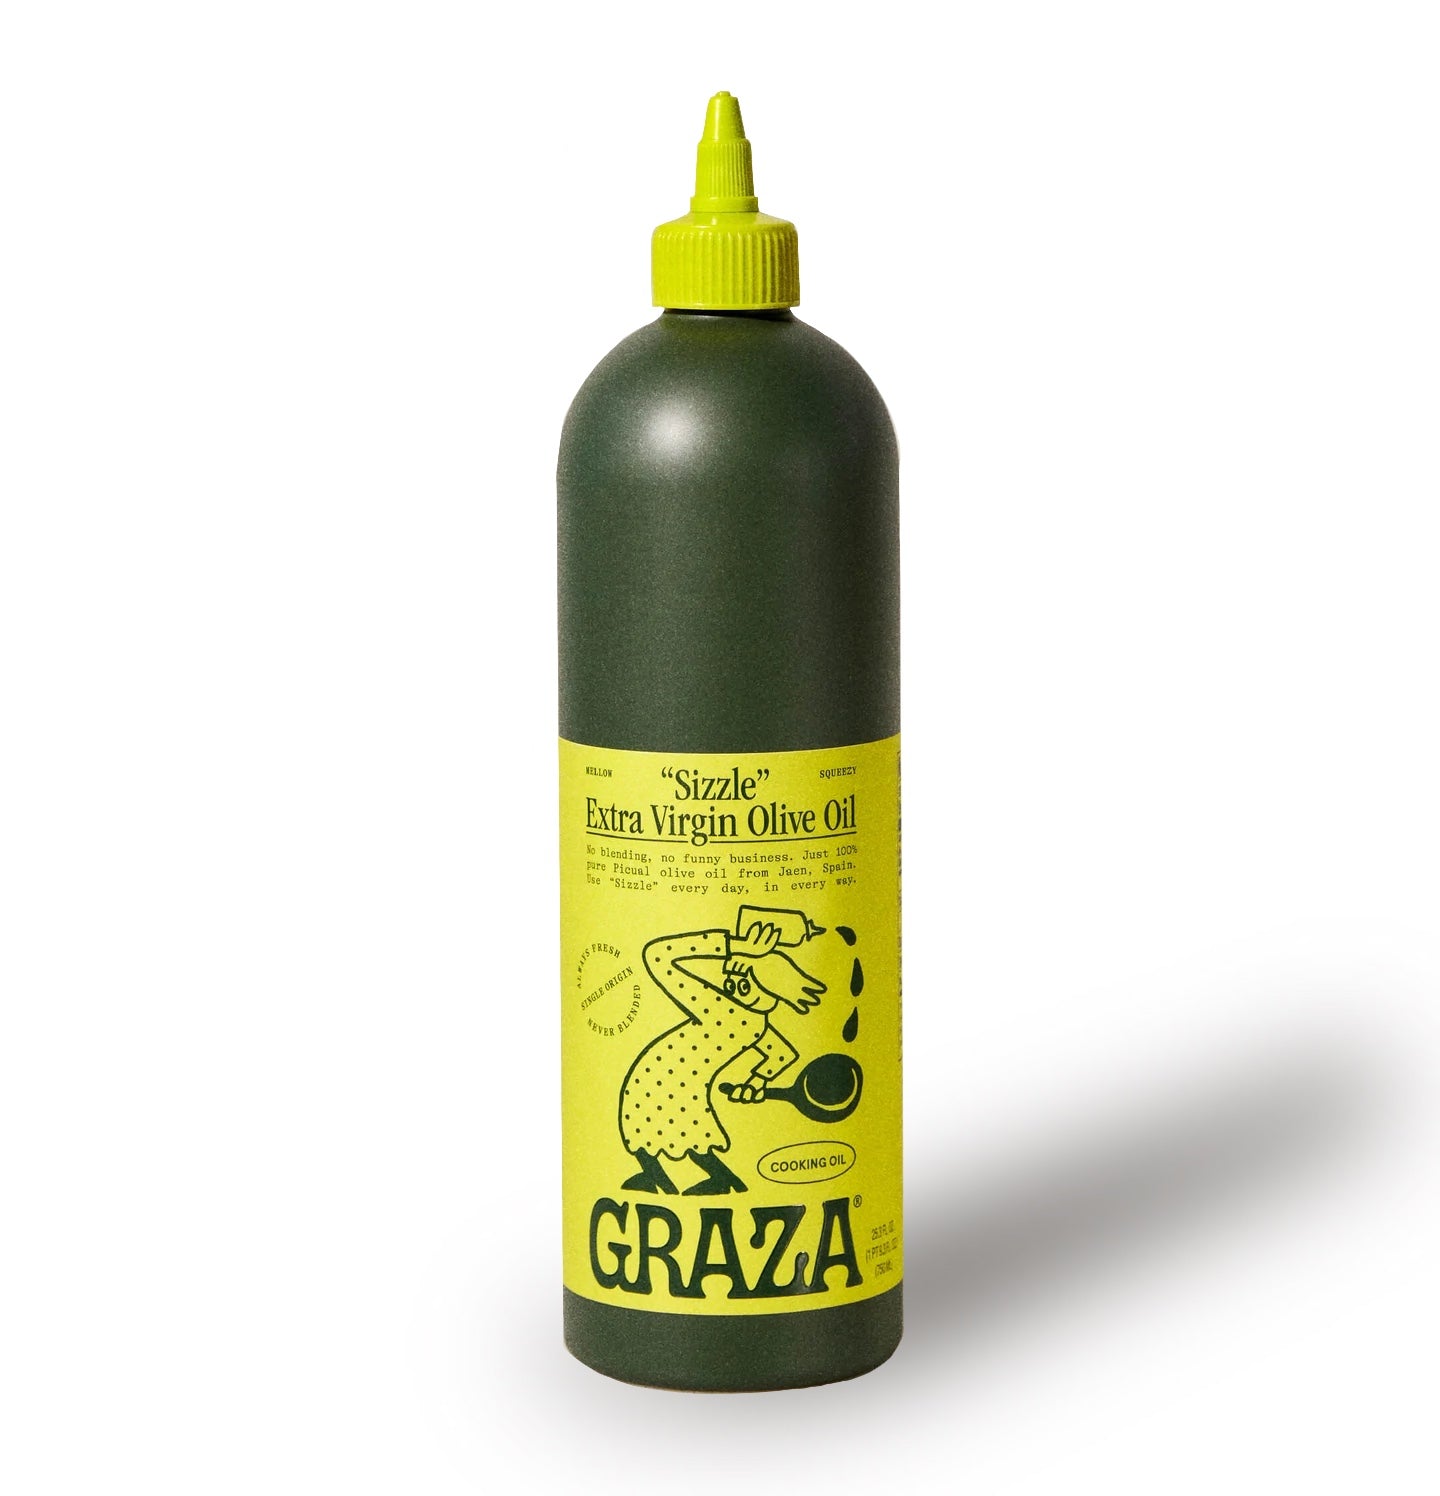 Sizzle Extra Virgin Olive Oil by Graza